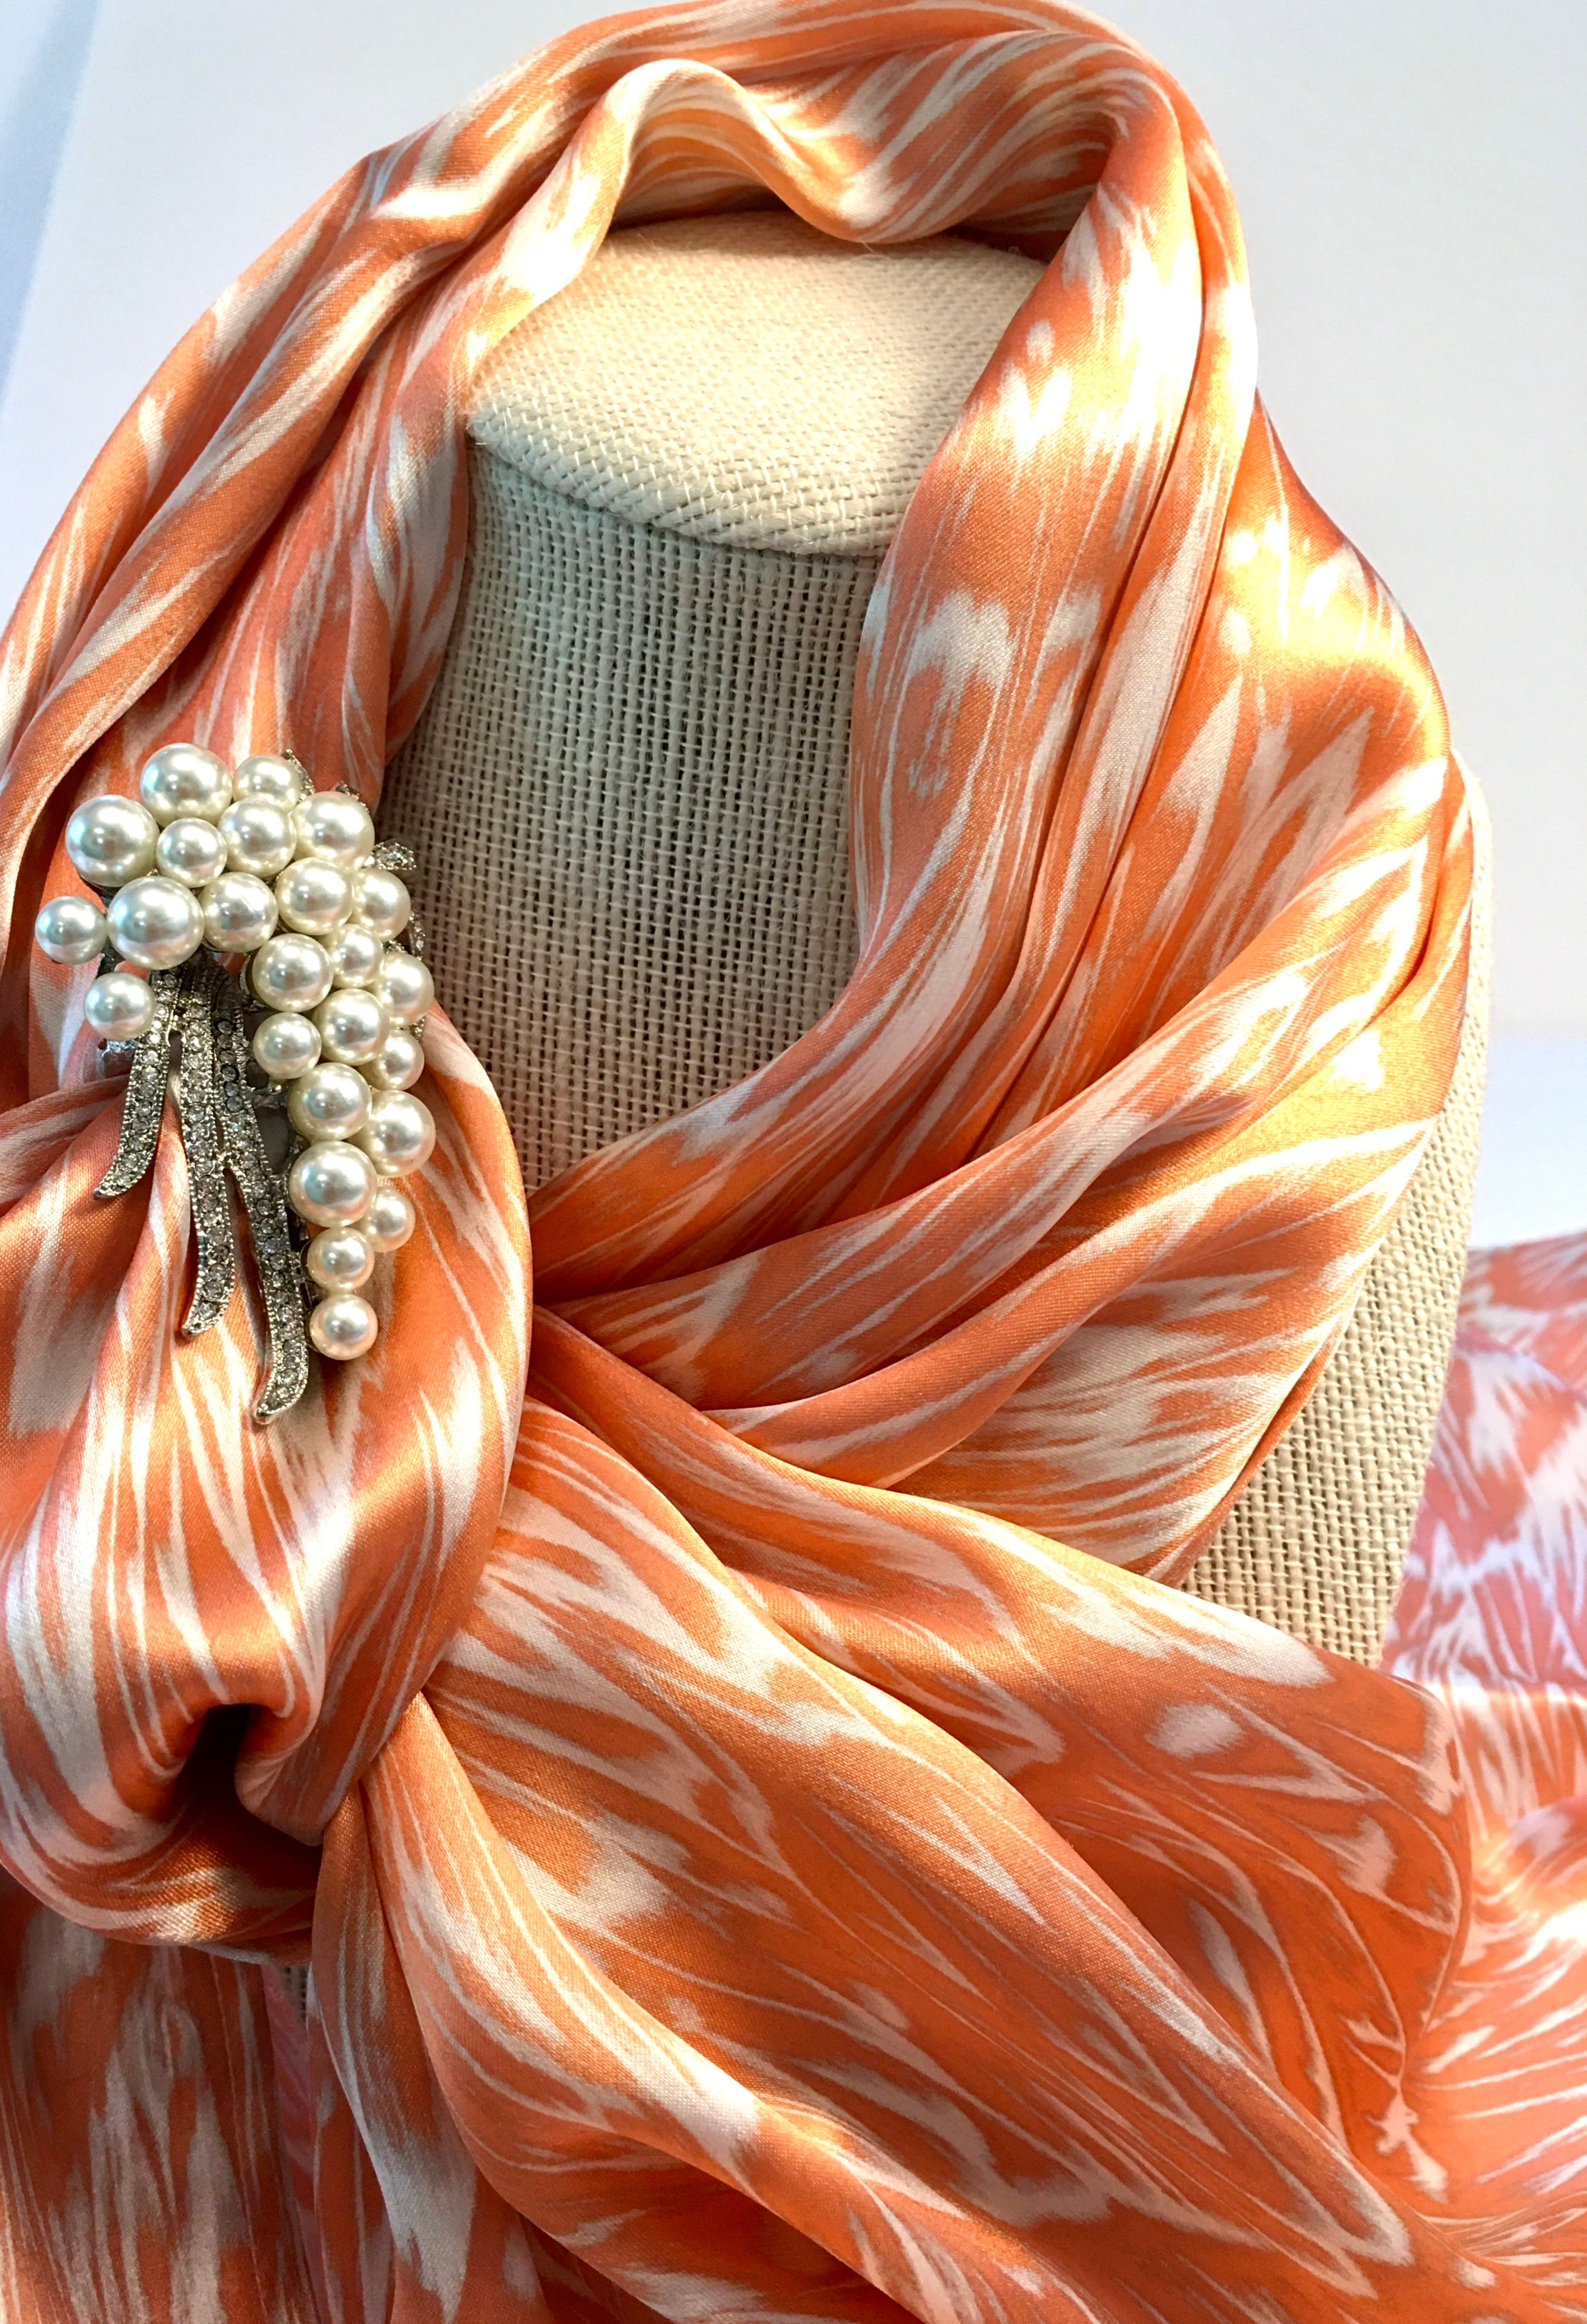 Scarf, Silk Mulberry Char muse Scarf,  32 x 32  inches